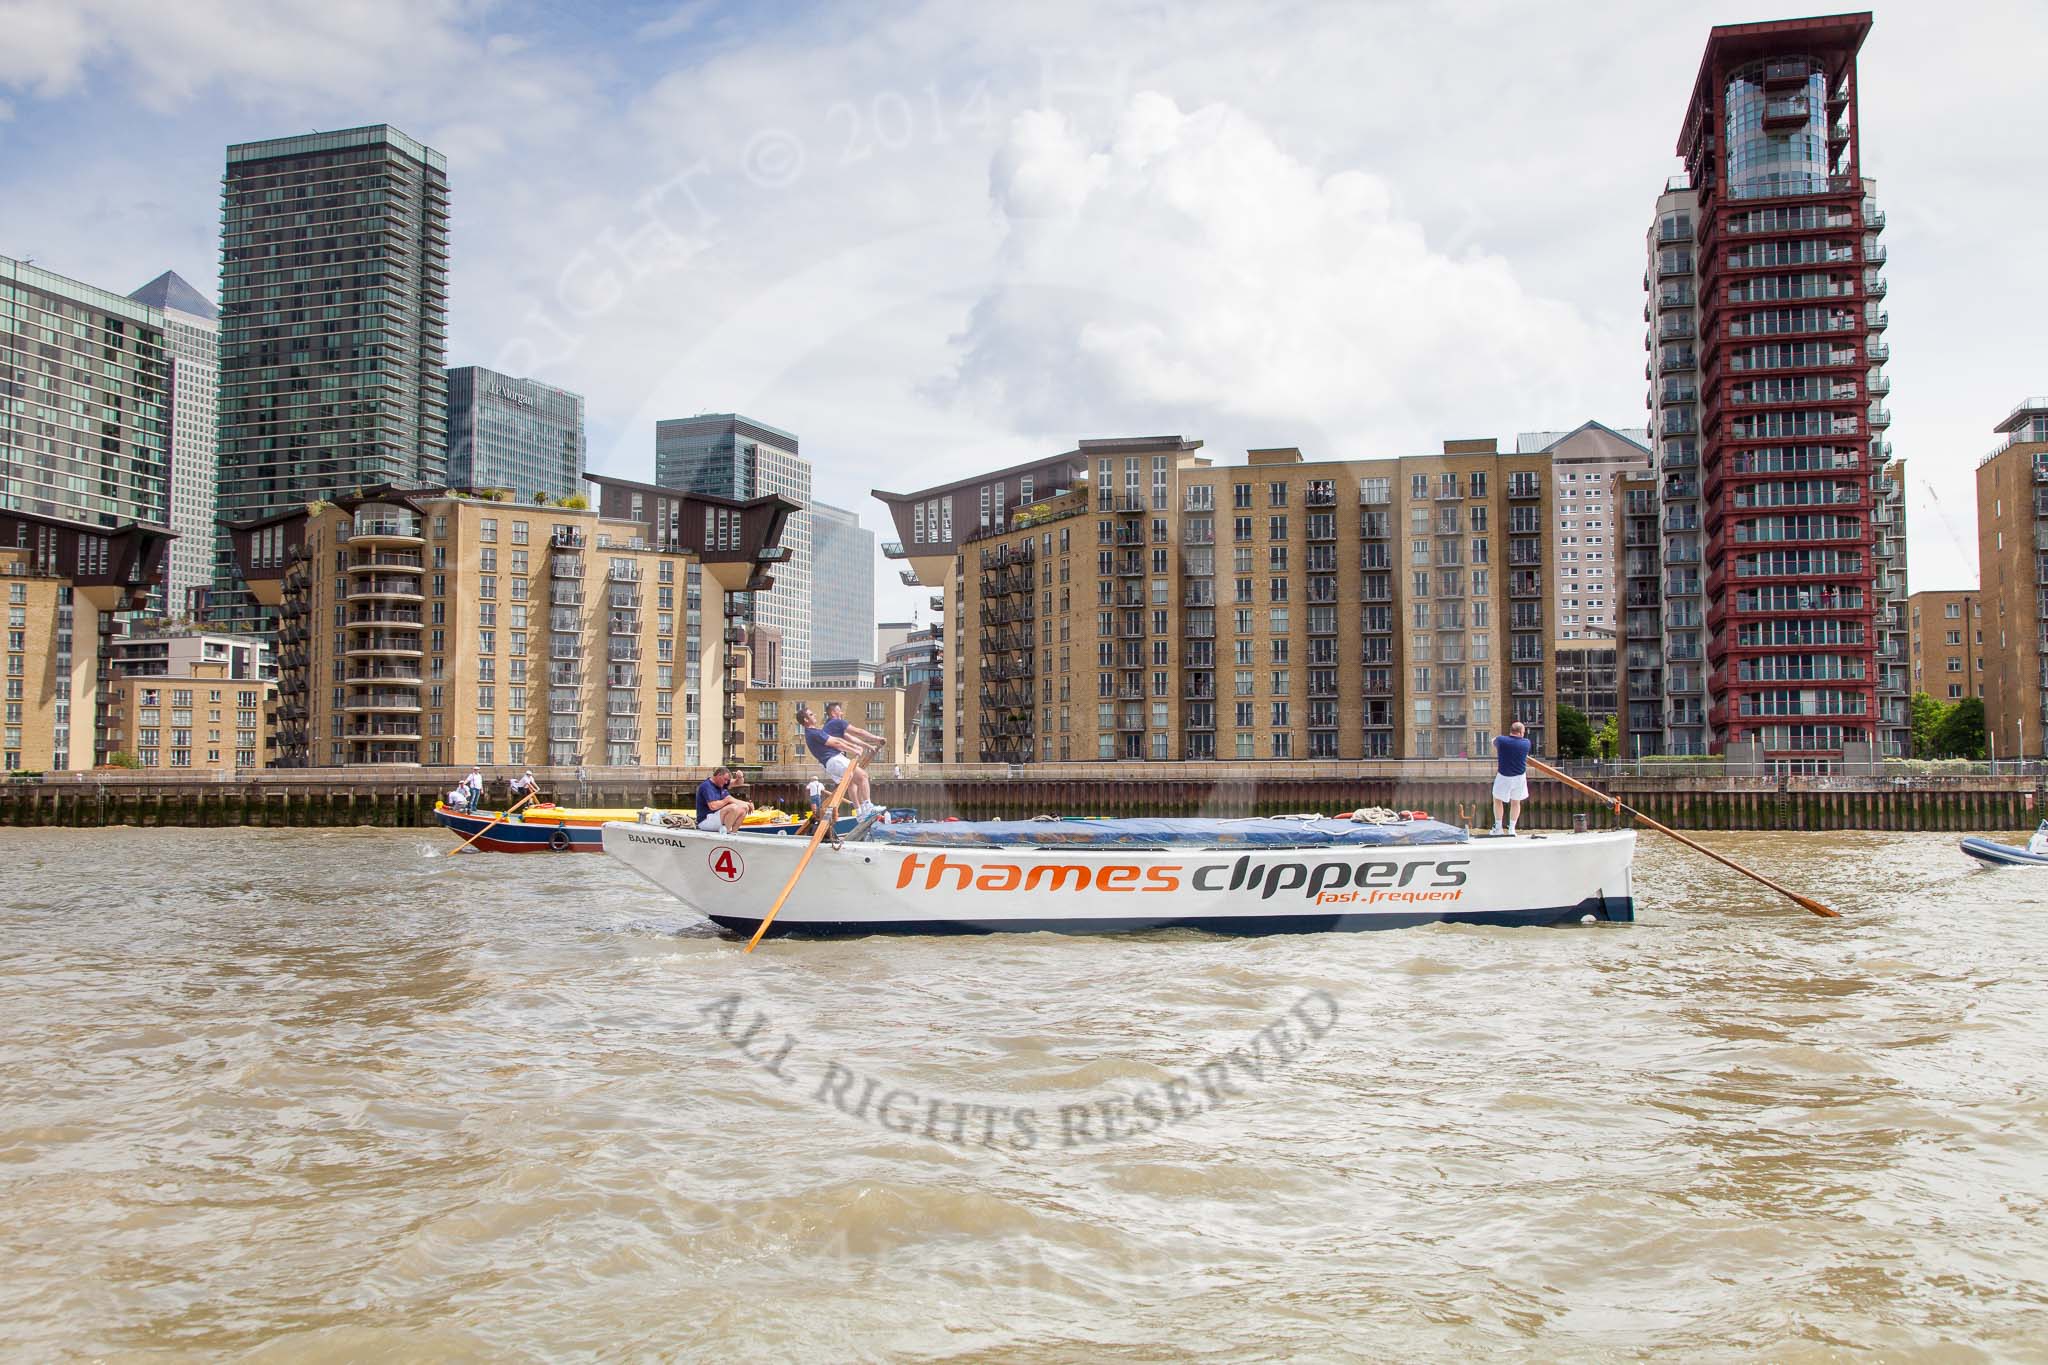 TOW River Thames Barge Driving Race 2014.
River Thames between Greenwich and Westminster,
London,

United Kingdom,
on 28 June 2014 at 12:47, image #137